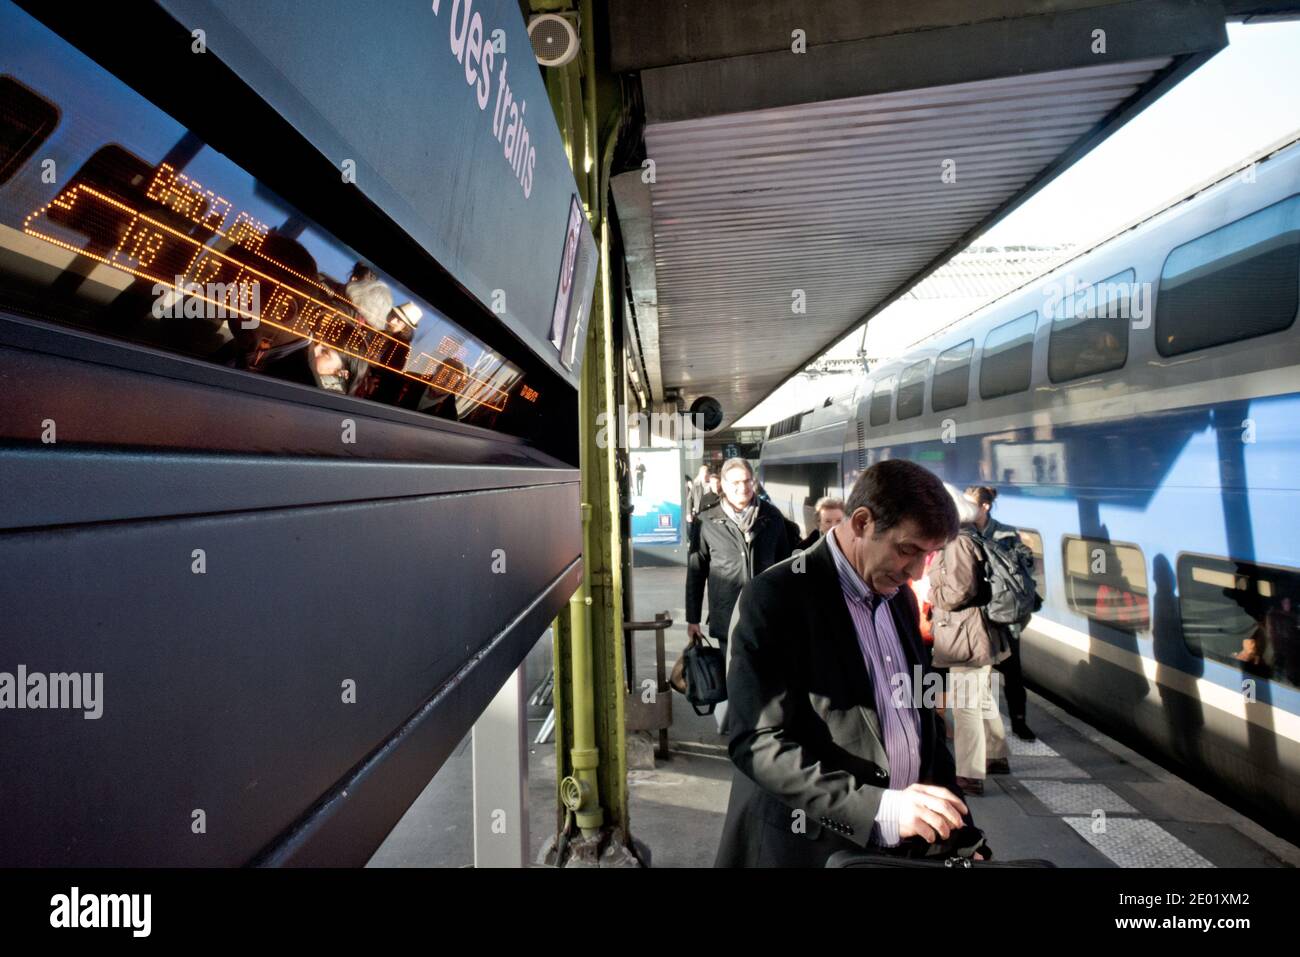 Atmosphere at Gare de Lyon station after the inauguration of the new TGV highspeed train line between France and Spain, in Paris, France on December 15, 2013. The new line which links Paris and Barcelona is jointly operated by the SNCF and its Spanish counterpart Renfe. Each day, two round trips will connect Paris to Barcelona. Photo by Nicolas Messyasz/ABACAPRESS.COM Stock Photo